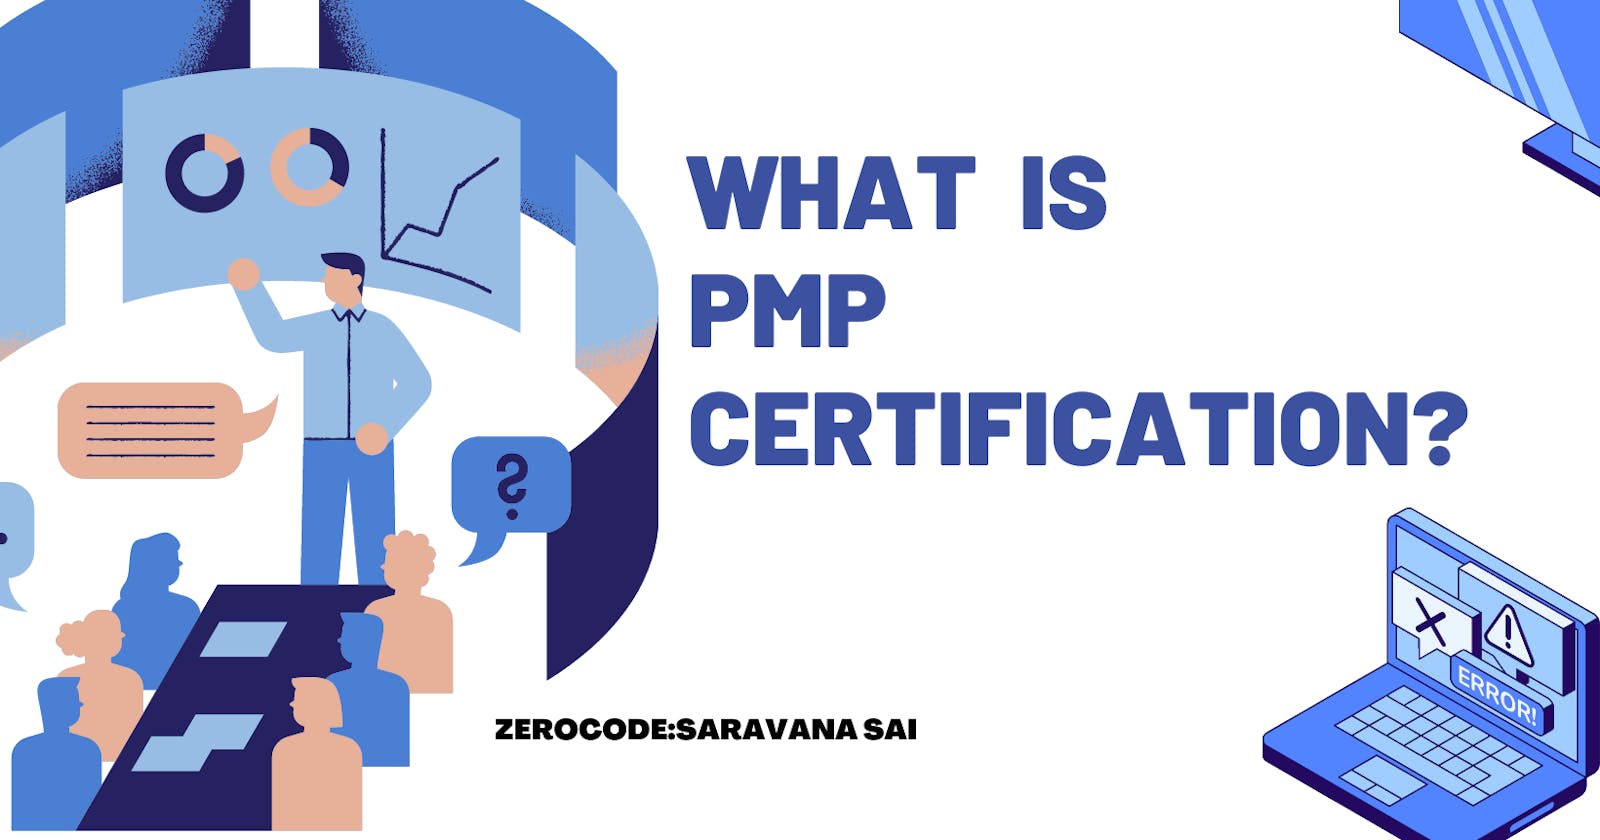 What is PMP Certification?